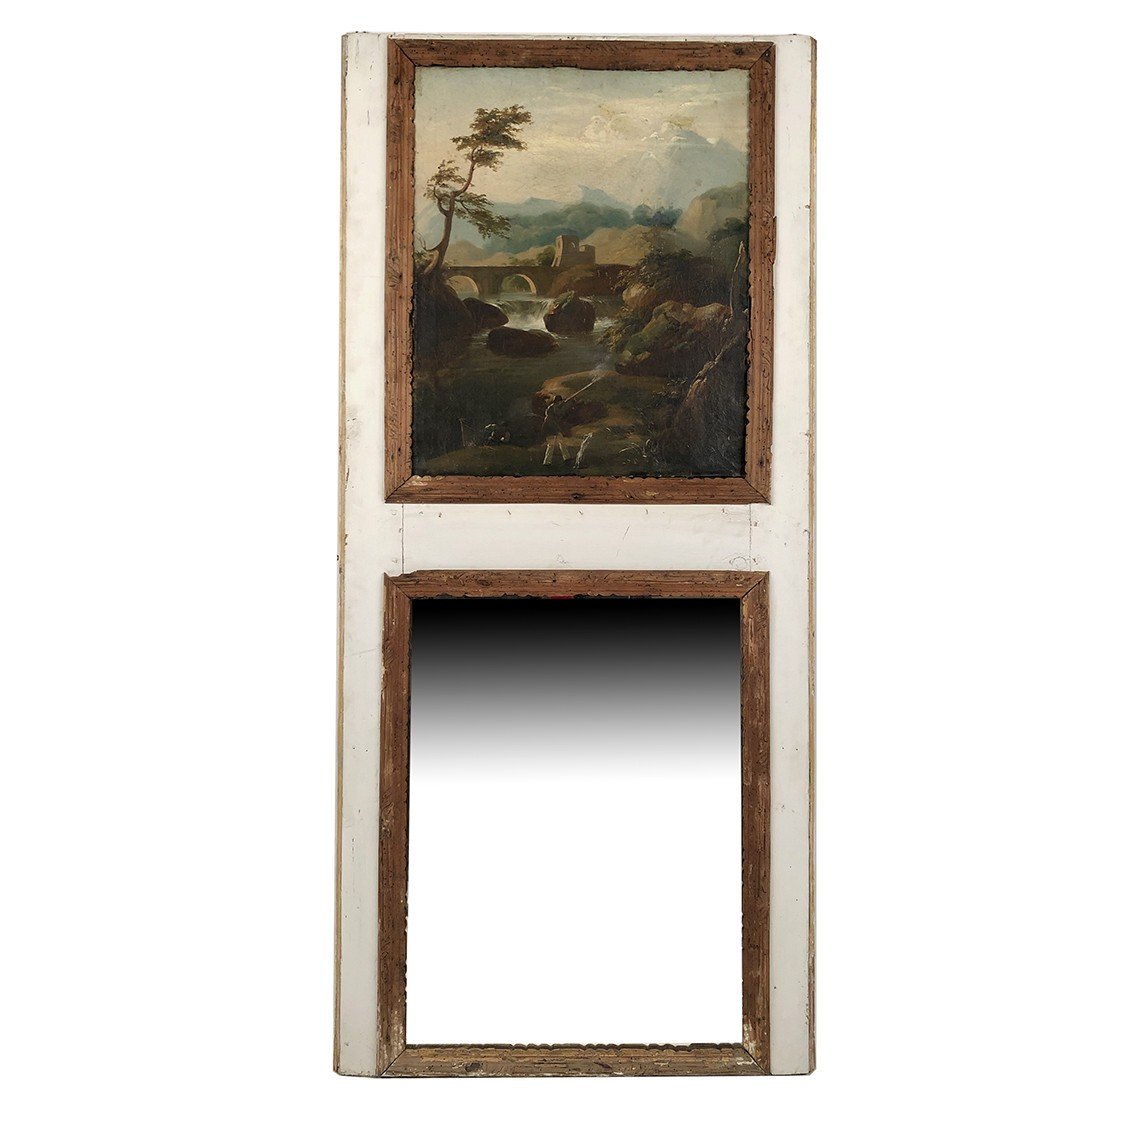 Trumeau Decorated With An Oil On Canvas Representing An Animated Landscape, Early 19th Century